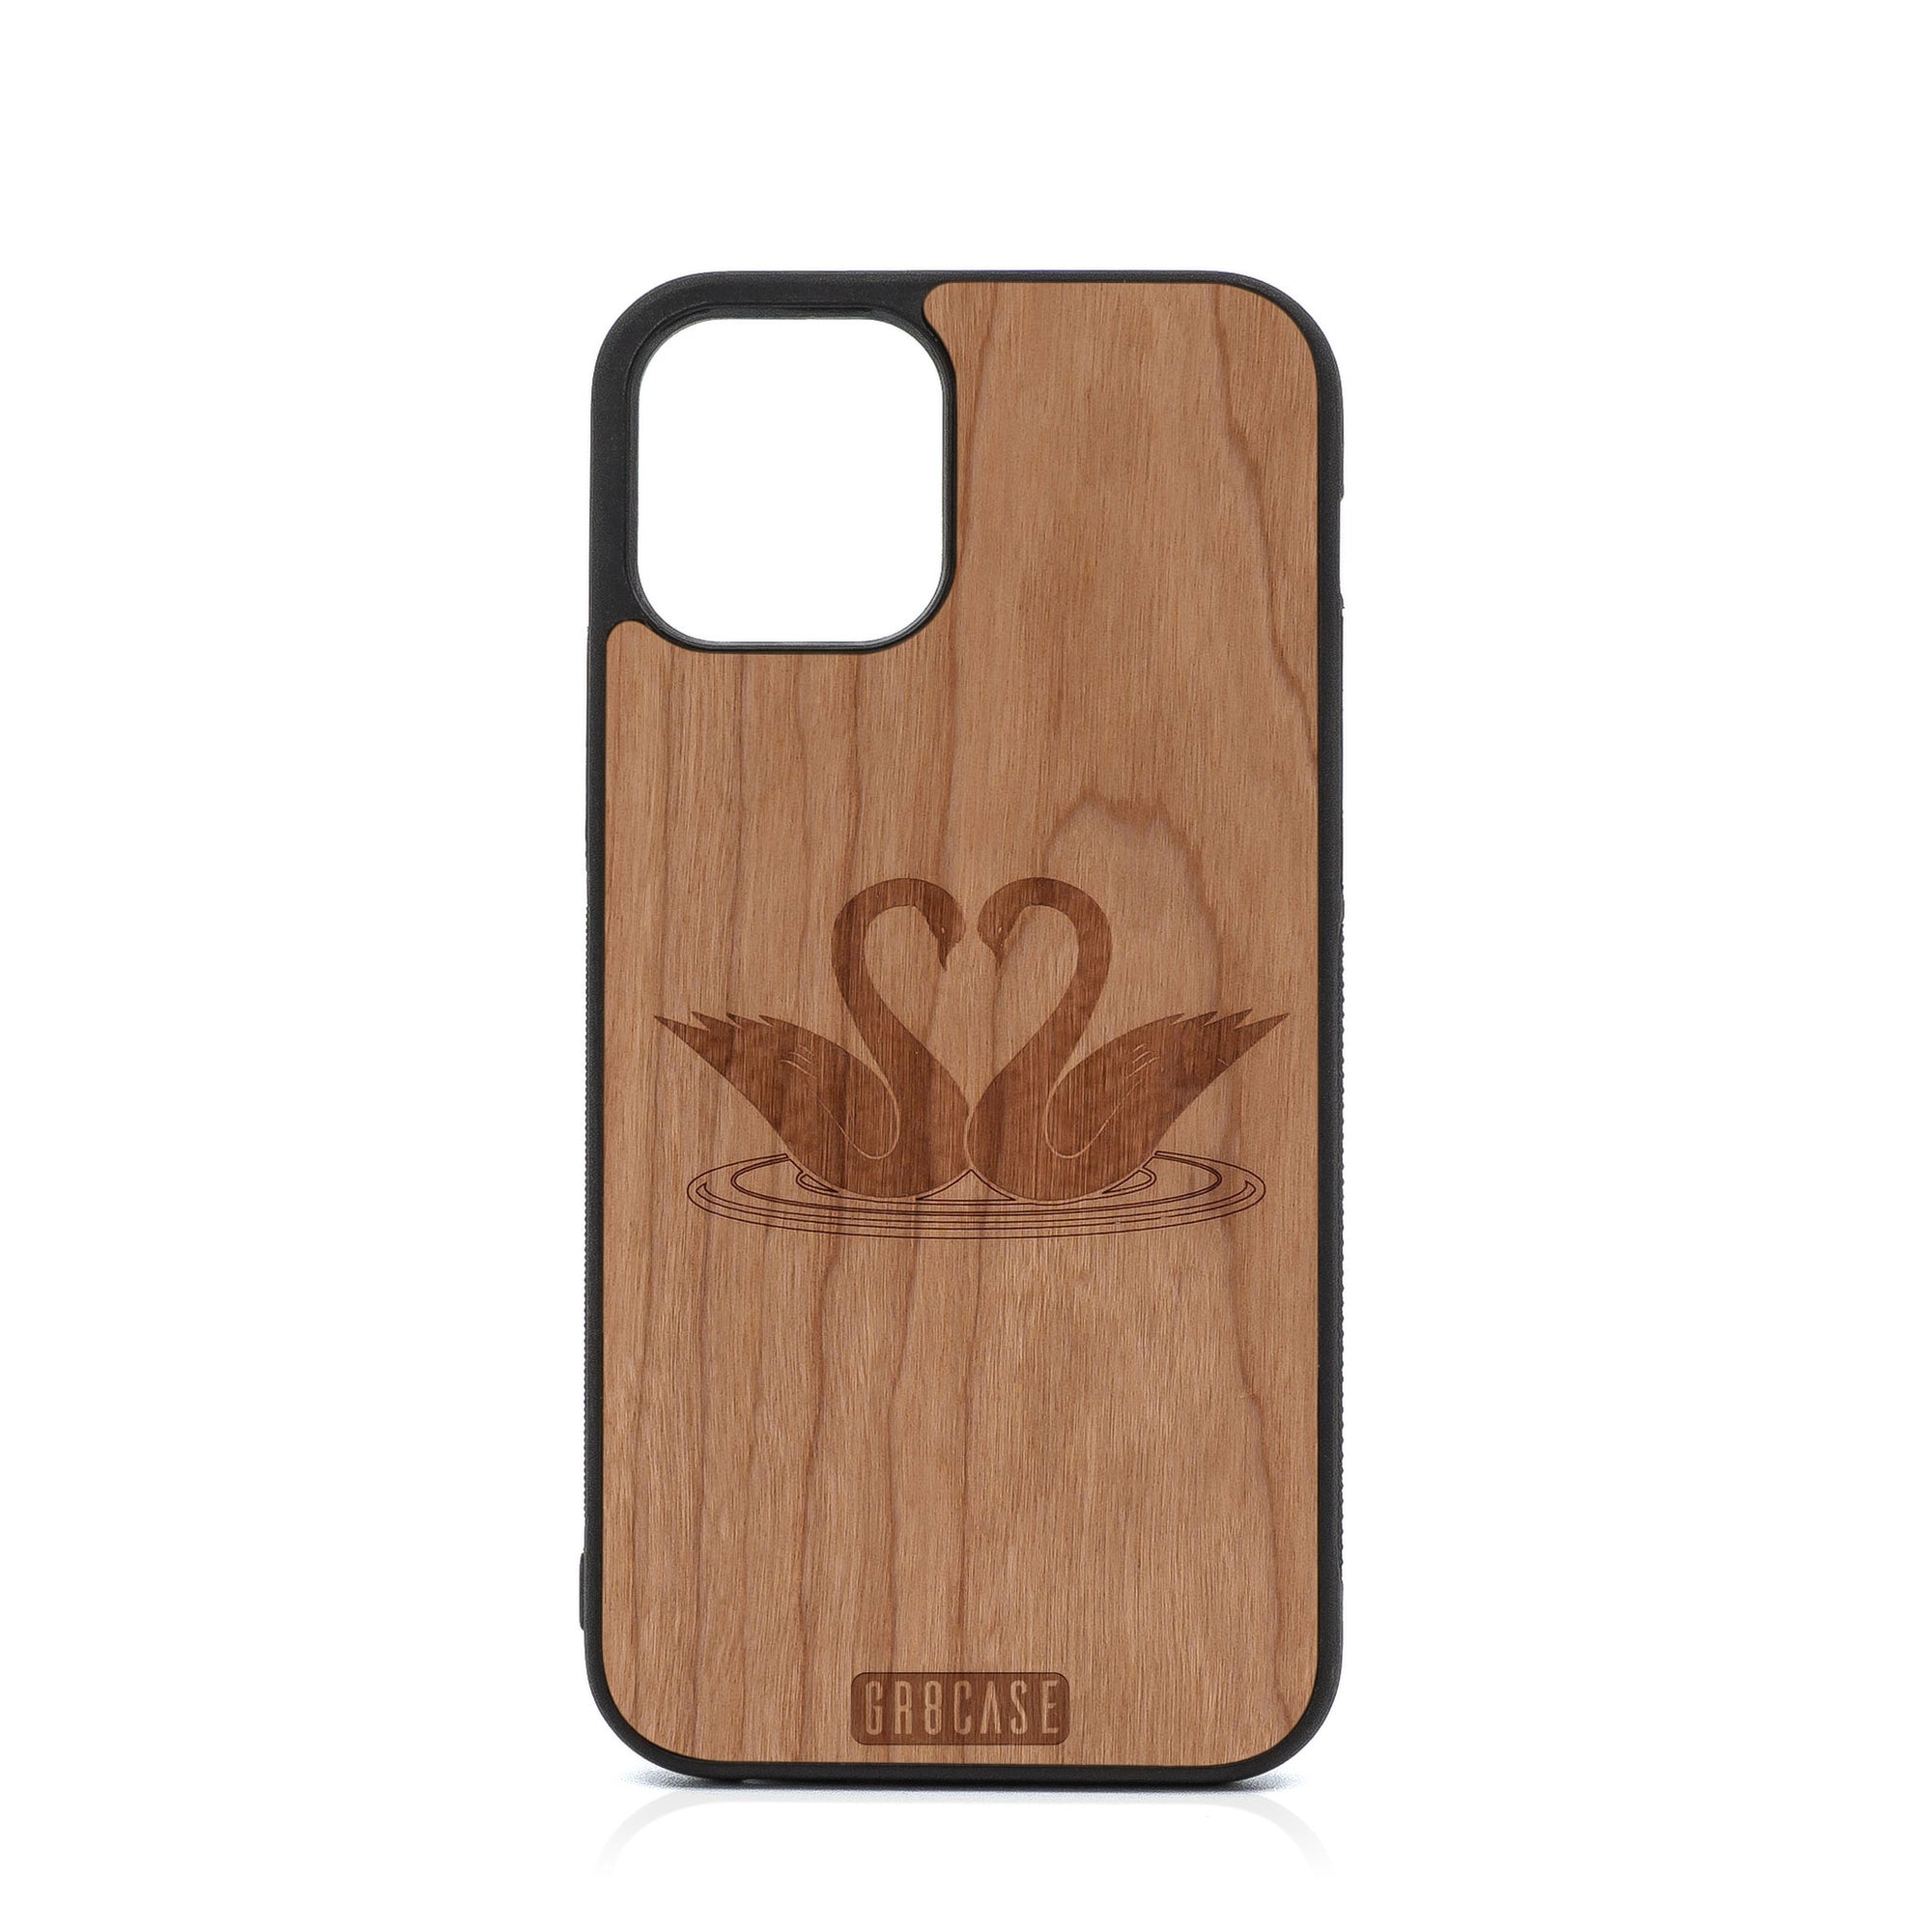 Swans Design Wood Case For iPhone 12